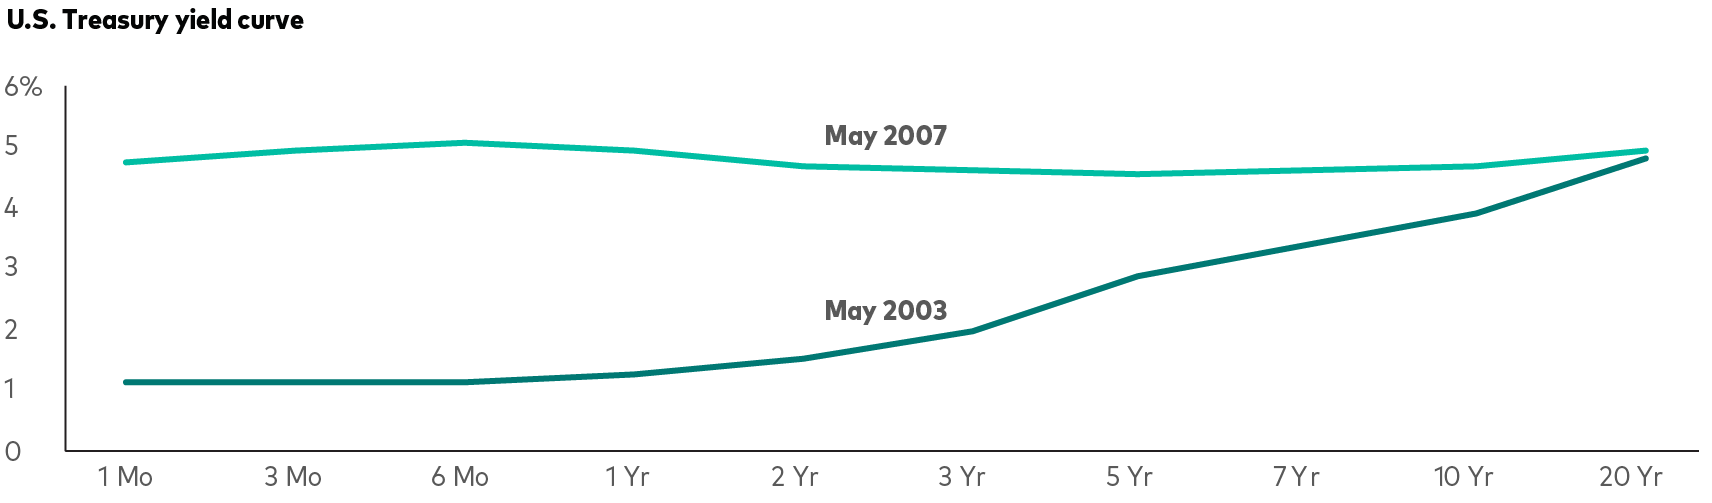 One line shows the U.S. Treasury yield curve on May 2003. Yields for maturities up to 1 year are near 1%, and they increase toward 3% for maturities of 5 years and about 5% for maturities of 20 years.   Another line shows the U.S. Treasury yield curve on May 2007. Shorter-term yields are much higher than they were 5 years earlier. Yields for maturities up to 1 year on this yield curve are near 5%. They fall slightly for yields of maturities roughly between 3 and 10 year, before returning to about 5% for maturities of 20 years. The 20-year level is very similar to that of 5 years earlier.   